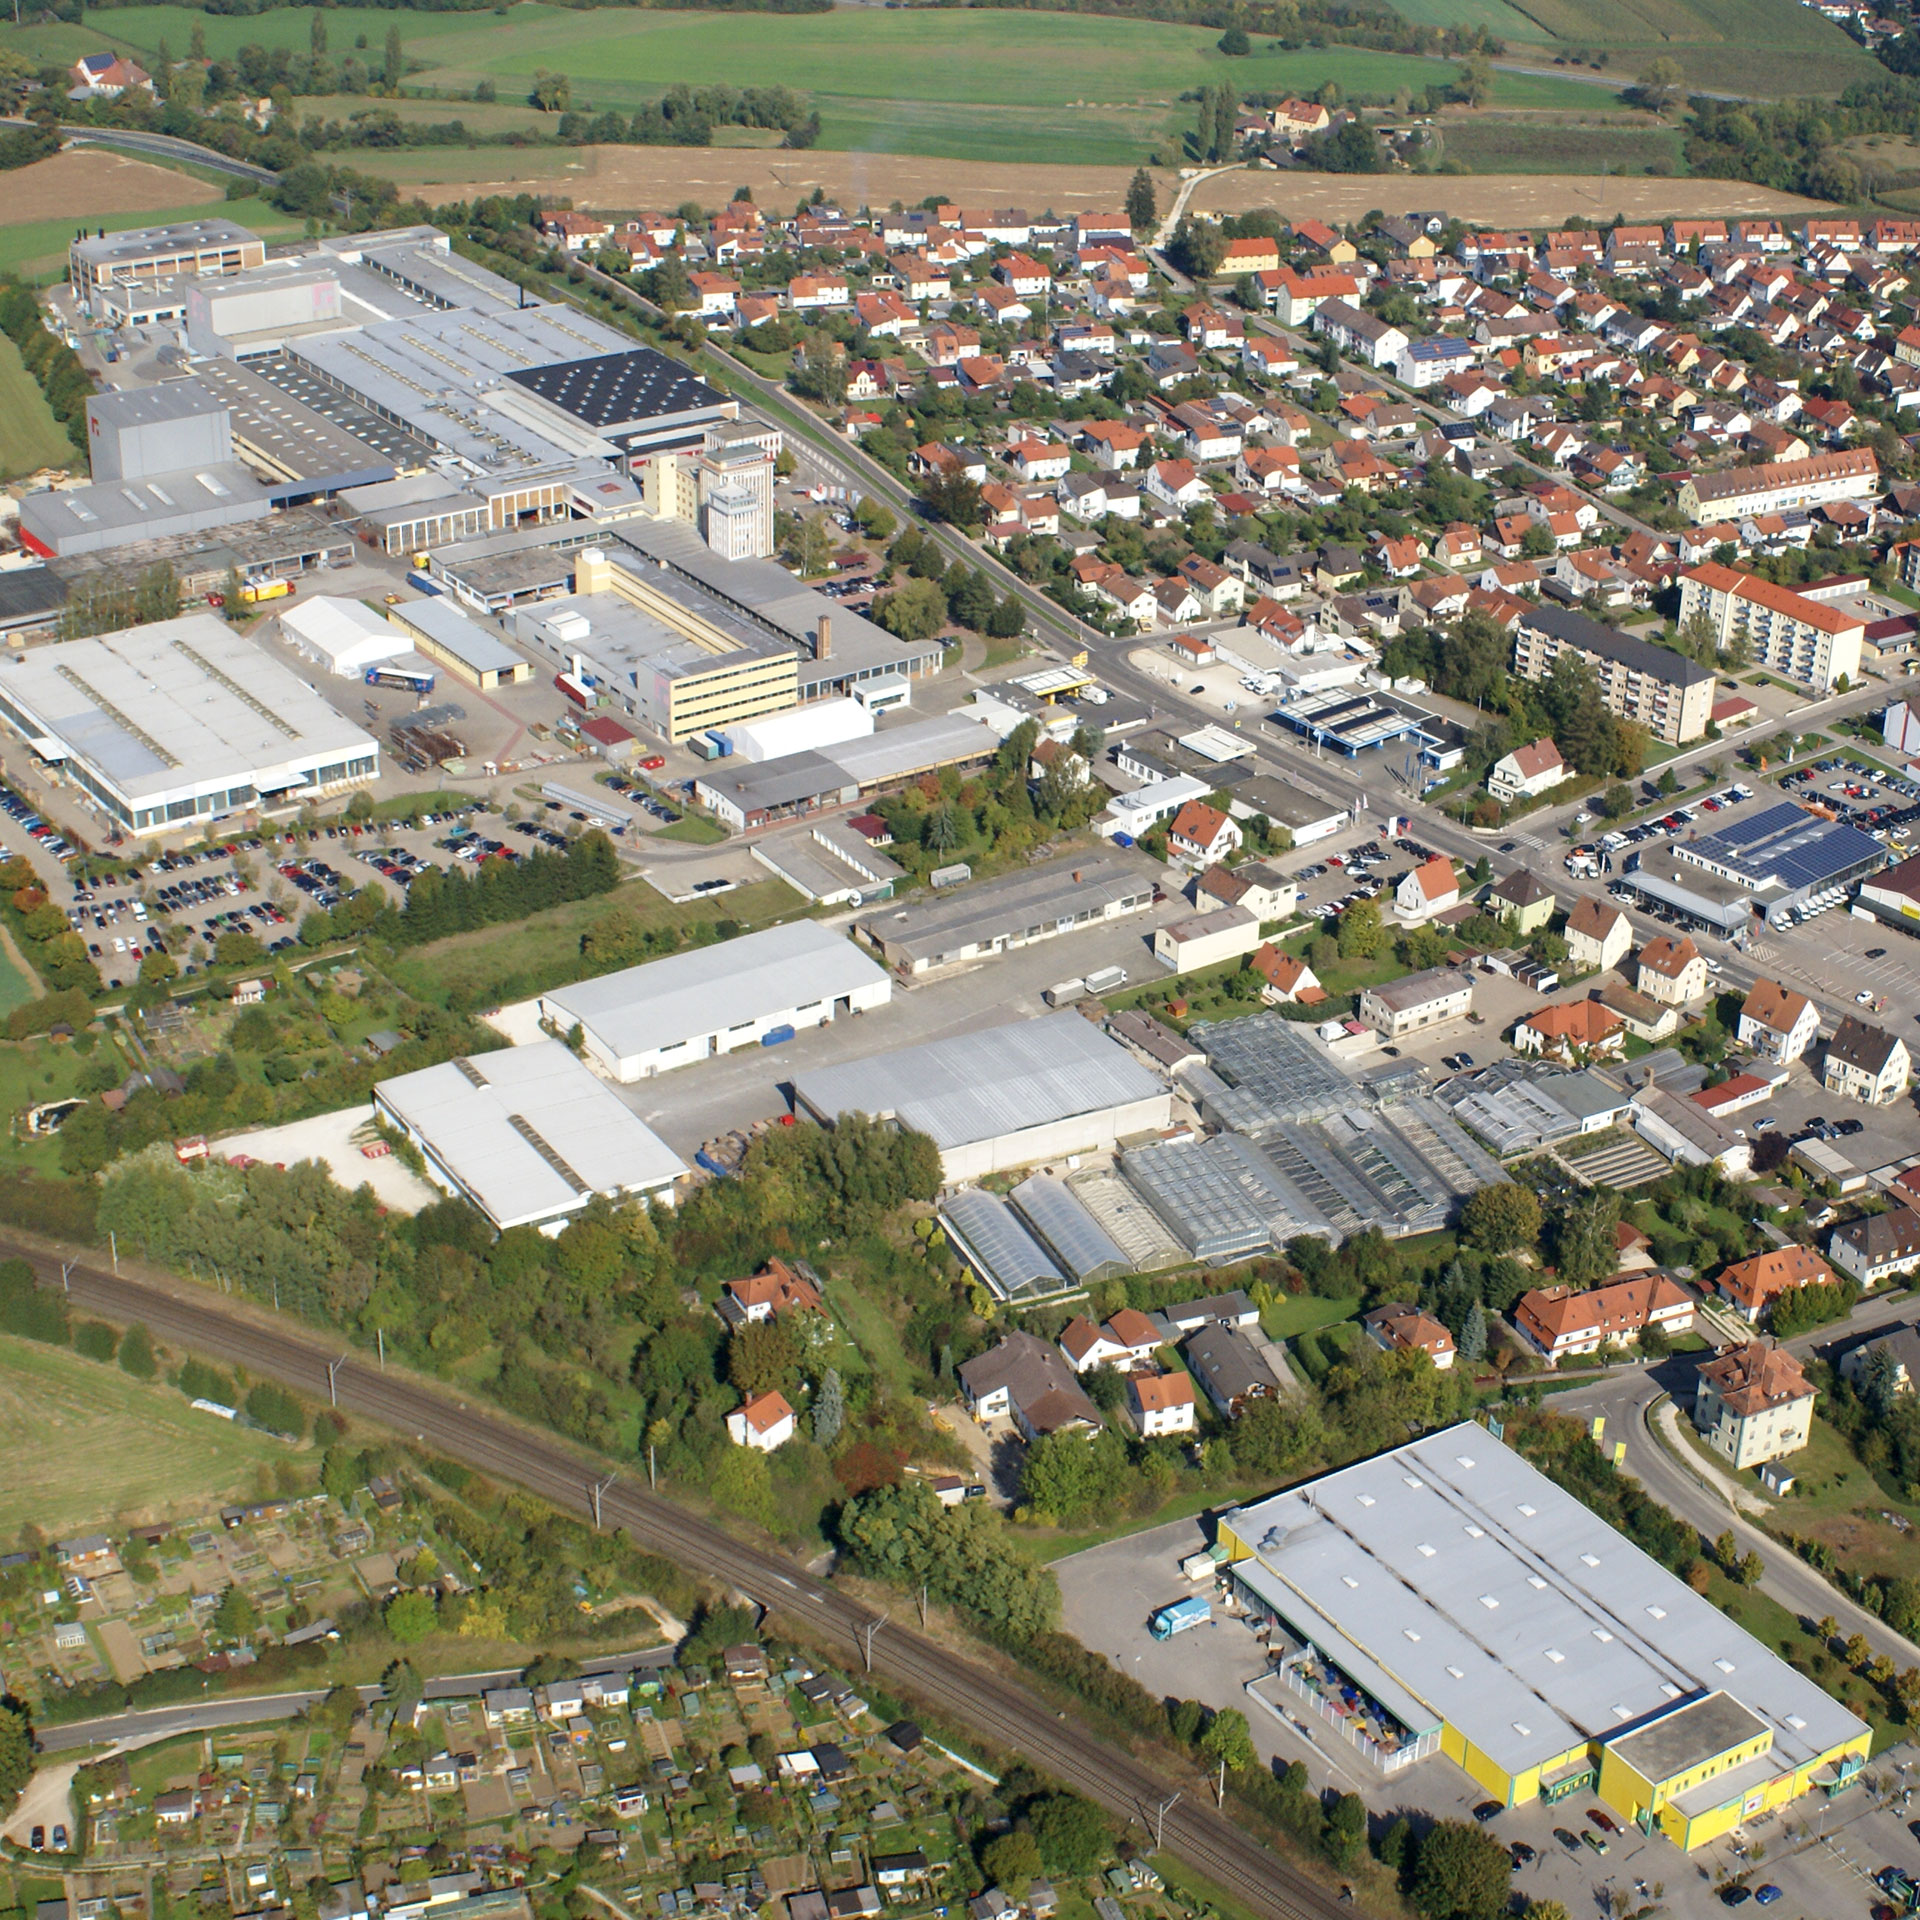 The group of aluminium specialists is made up of the GUTMANN Bausysteme GmbH as well as GUTMANN AG, with its subsidiaries GARTNER EXTRUSION GmbH (Gundelfingen), NORDALU GmbH (Neumünster) and the spin-off GUTMANN Aluminium Draht GmbH.